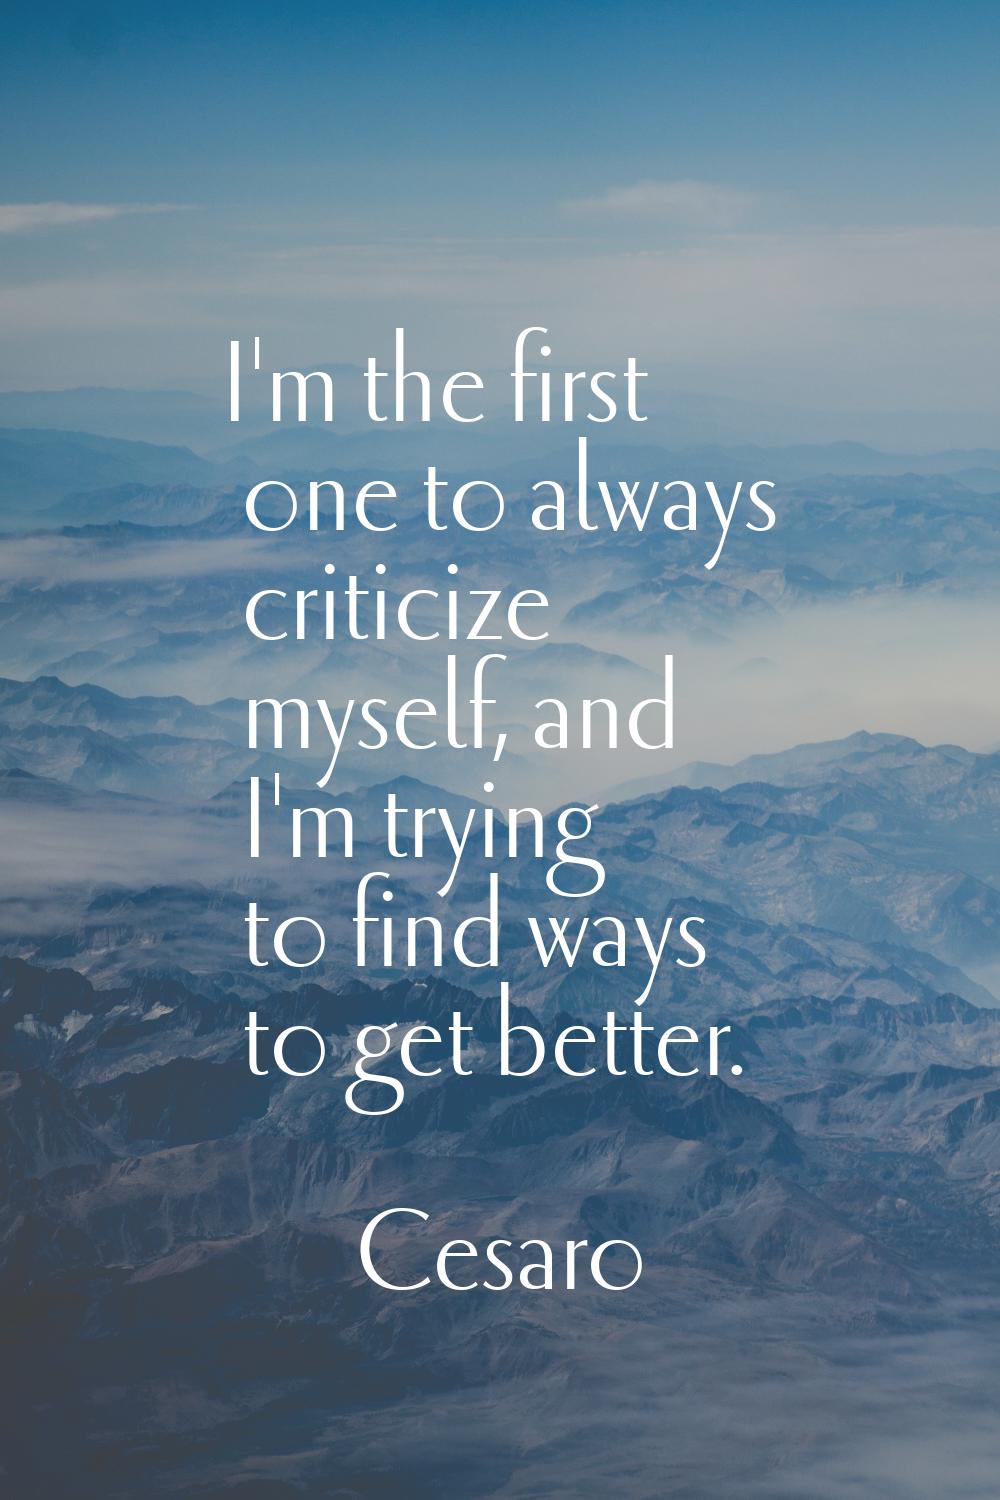 I'm the first one to always criticize myself, and I'm trying to find ways to get better.